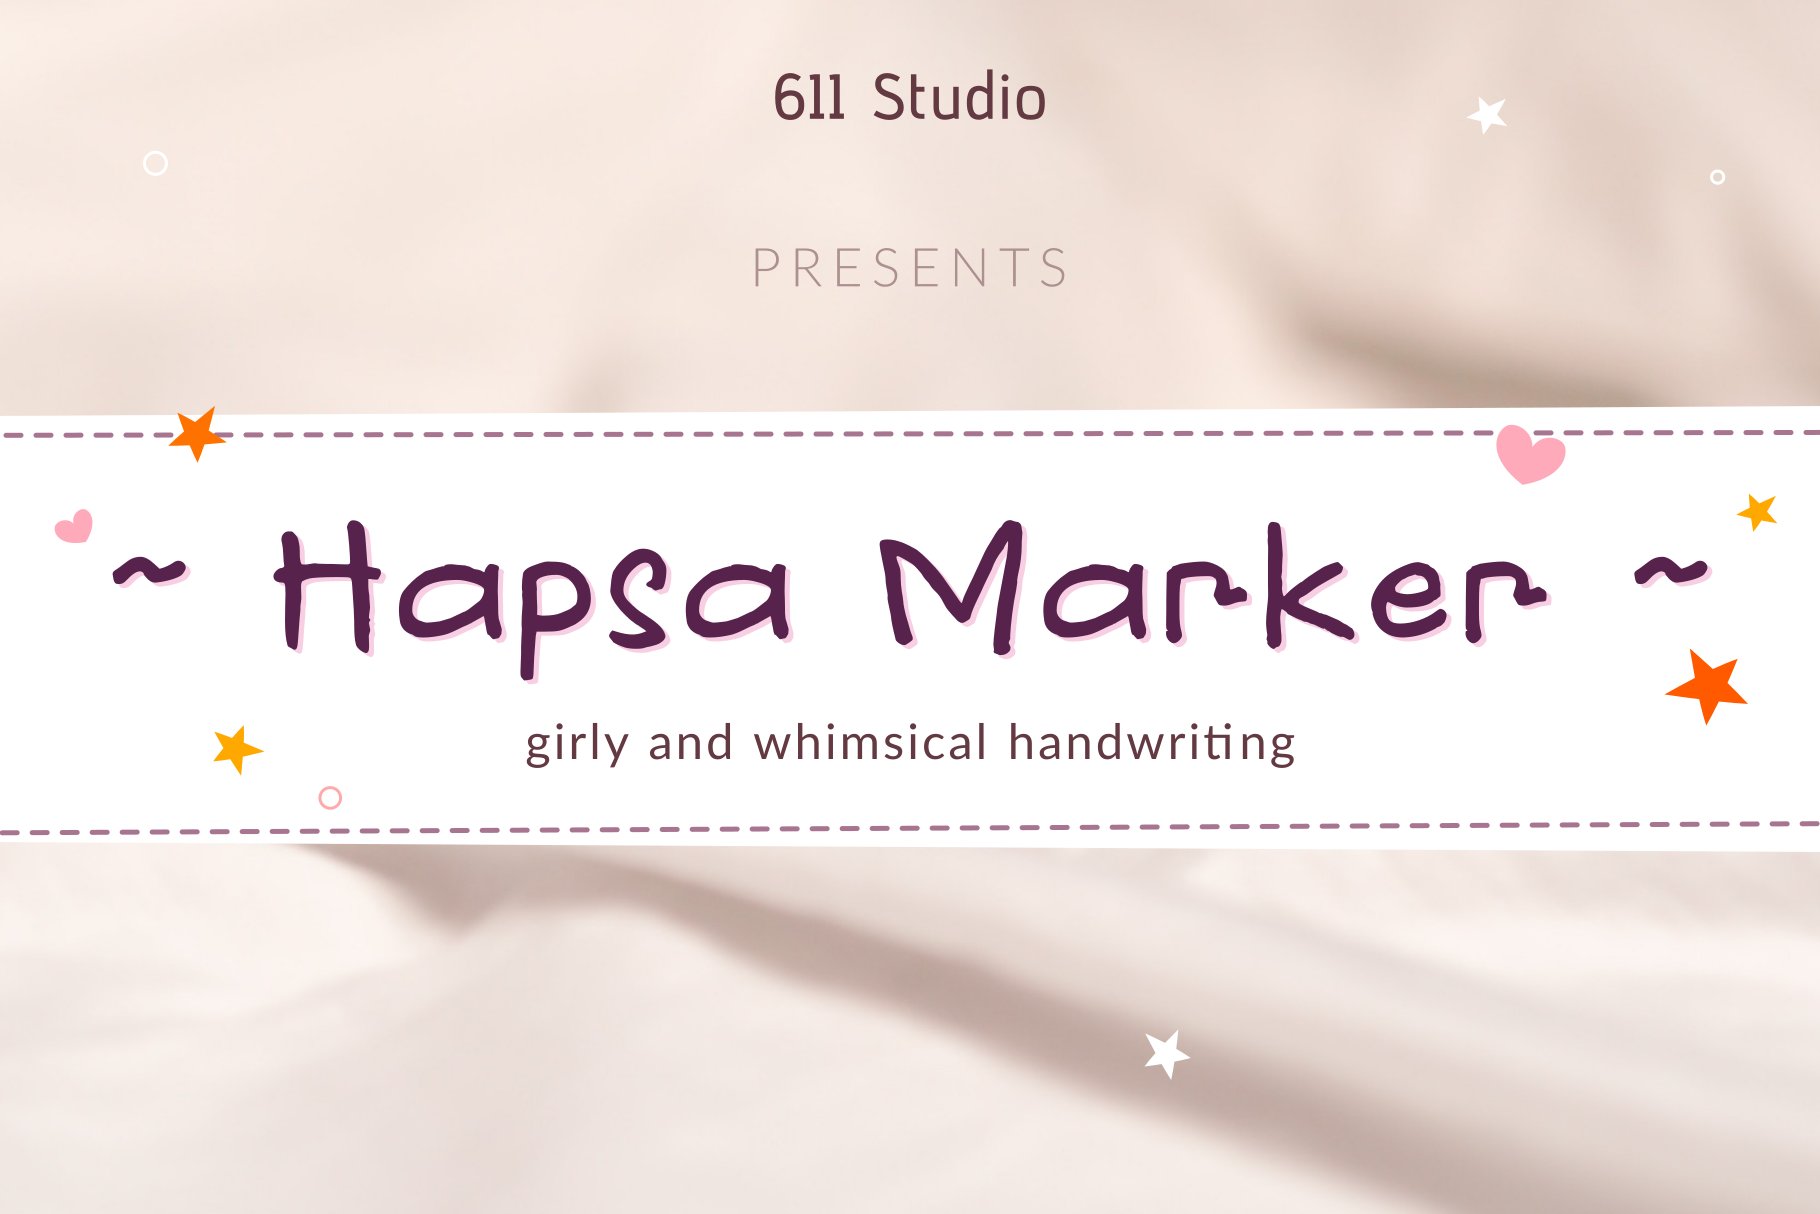 Hapsa Marker ~ Girly and whimsical cover image.